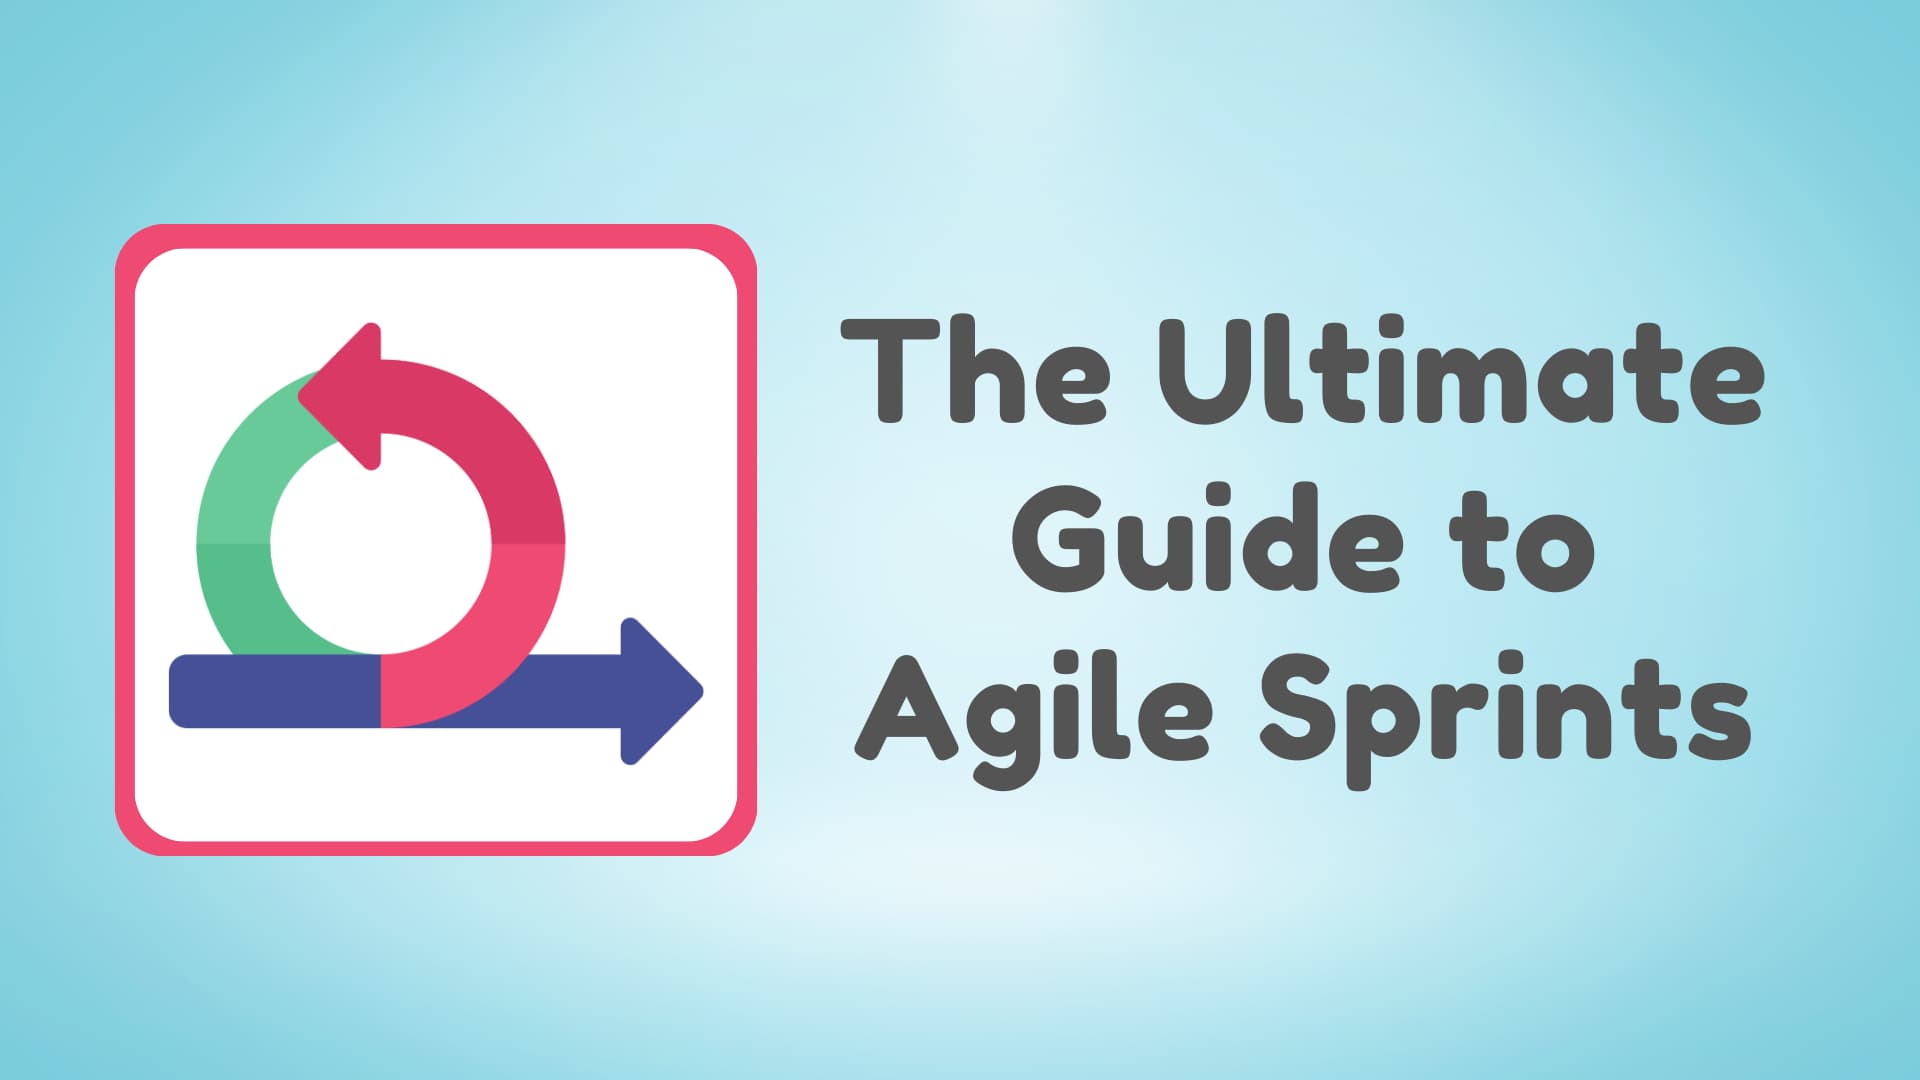 The Ultimate Guide to Agile Sprints: